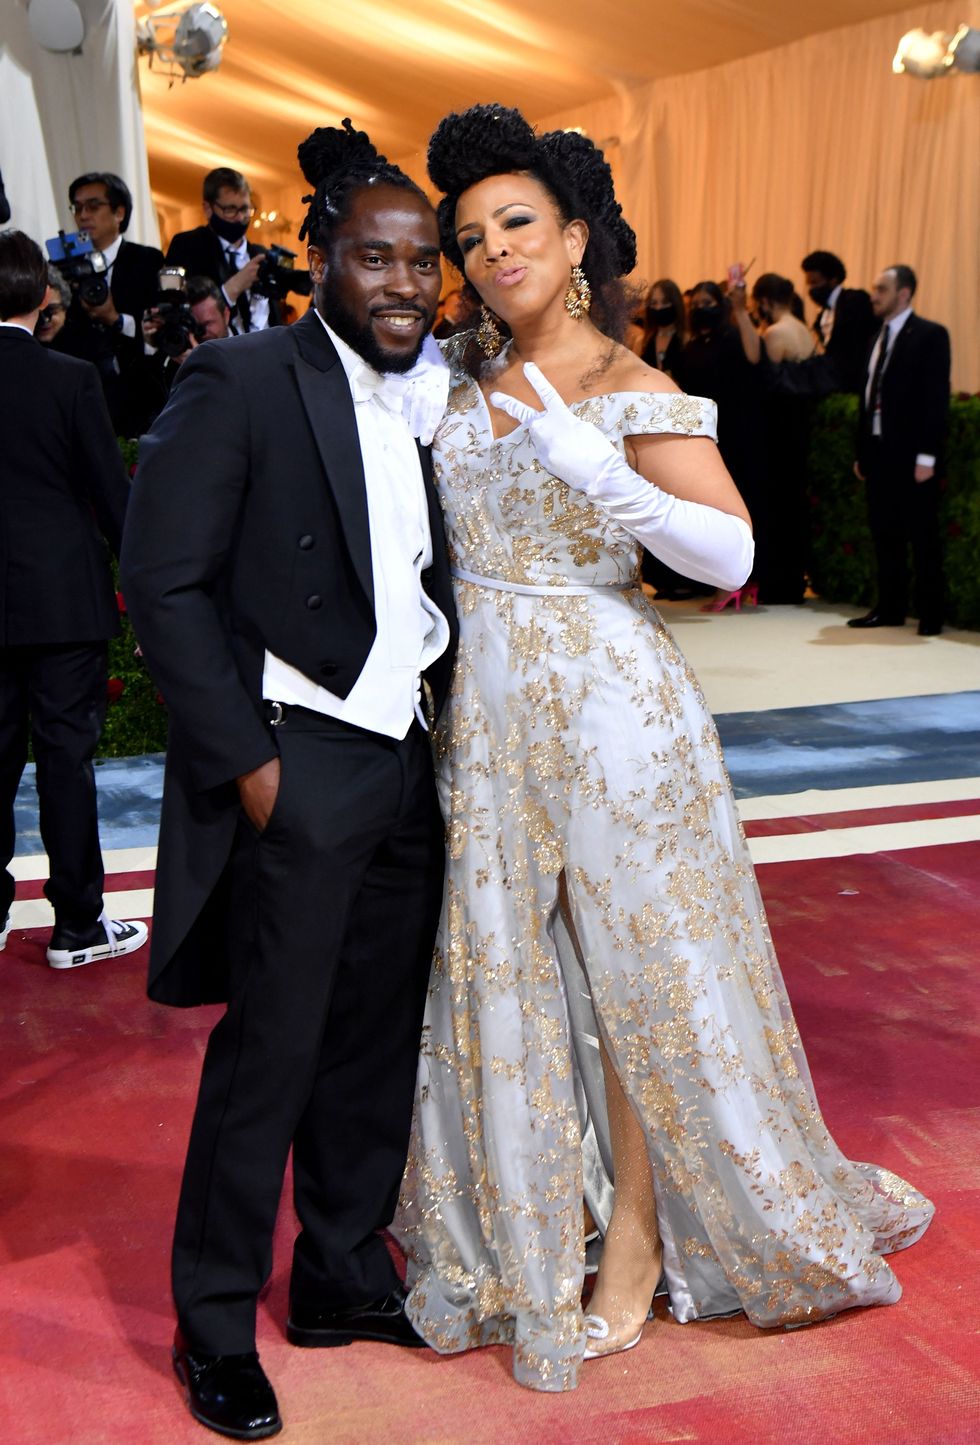 the couple embraces as they get engaged at the met gala